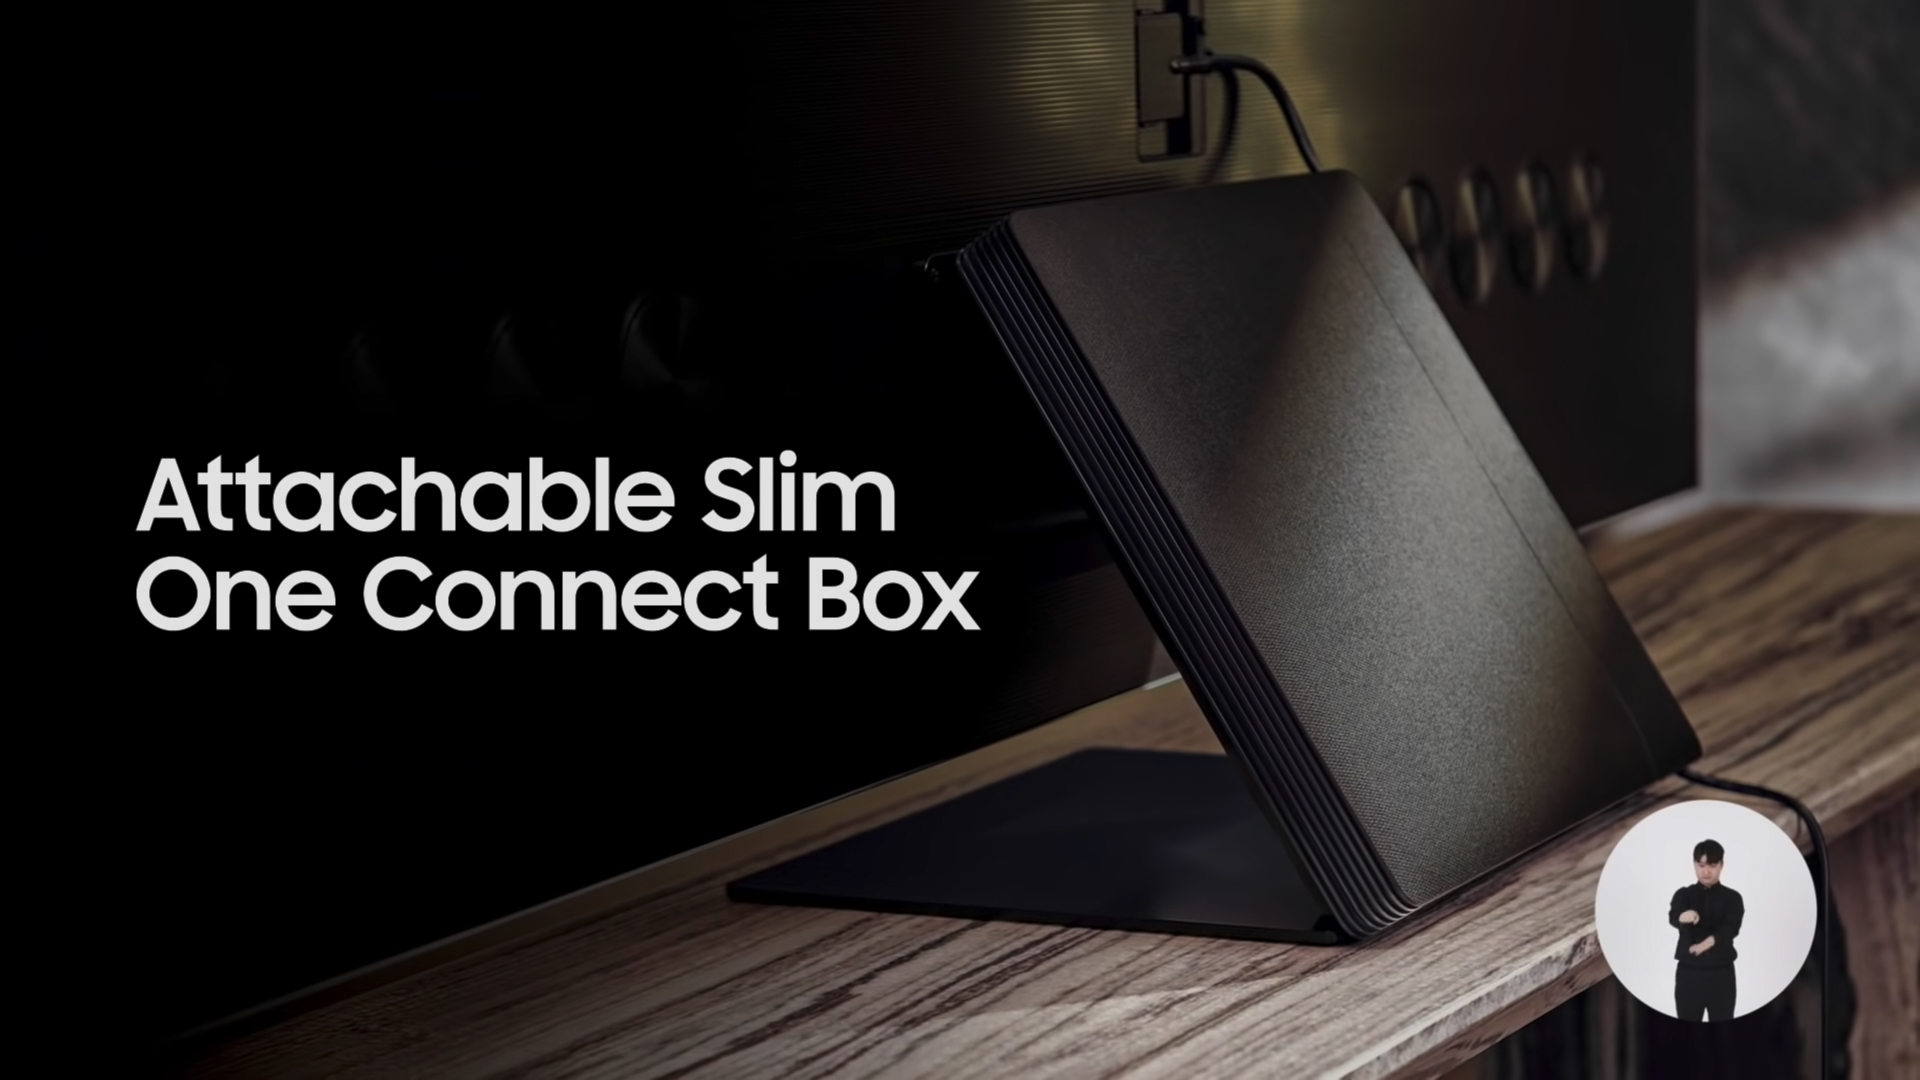 The Samsung One Connect box is back for 2021, but something needs to